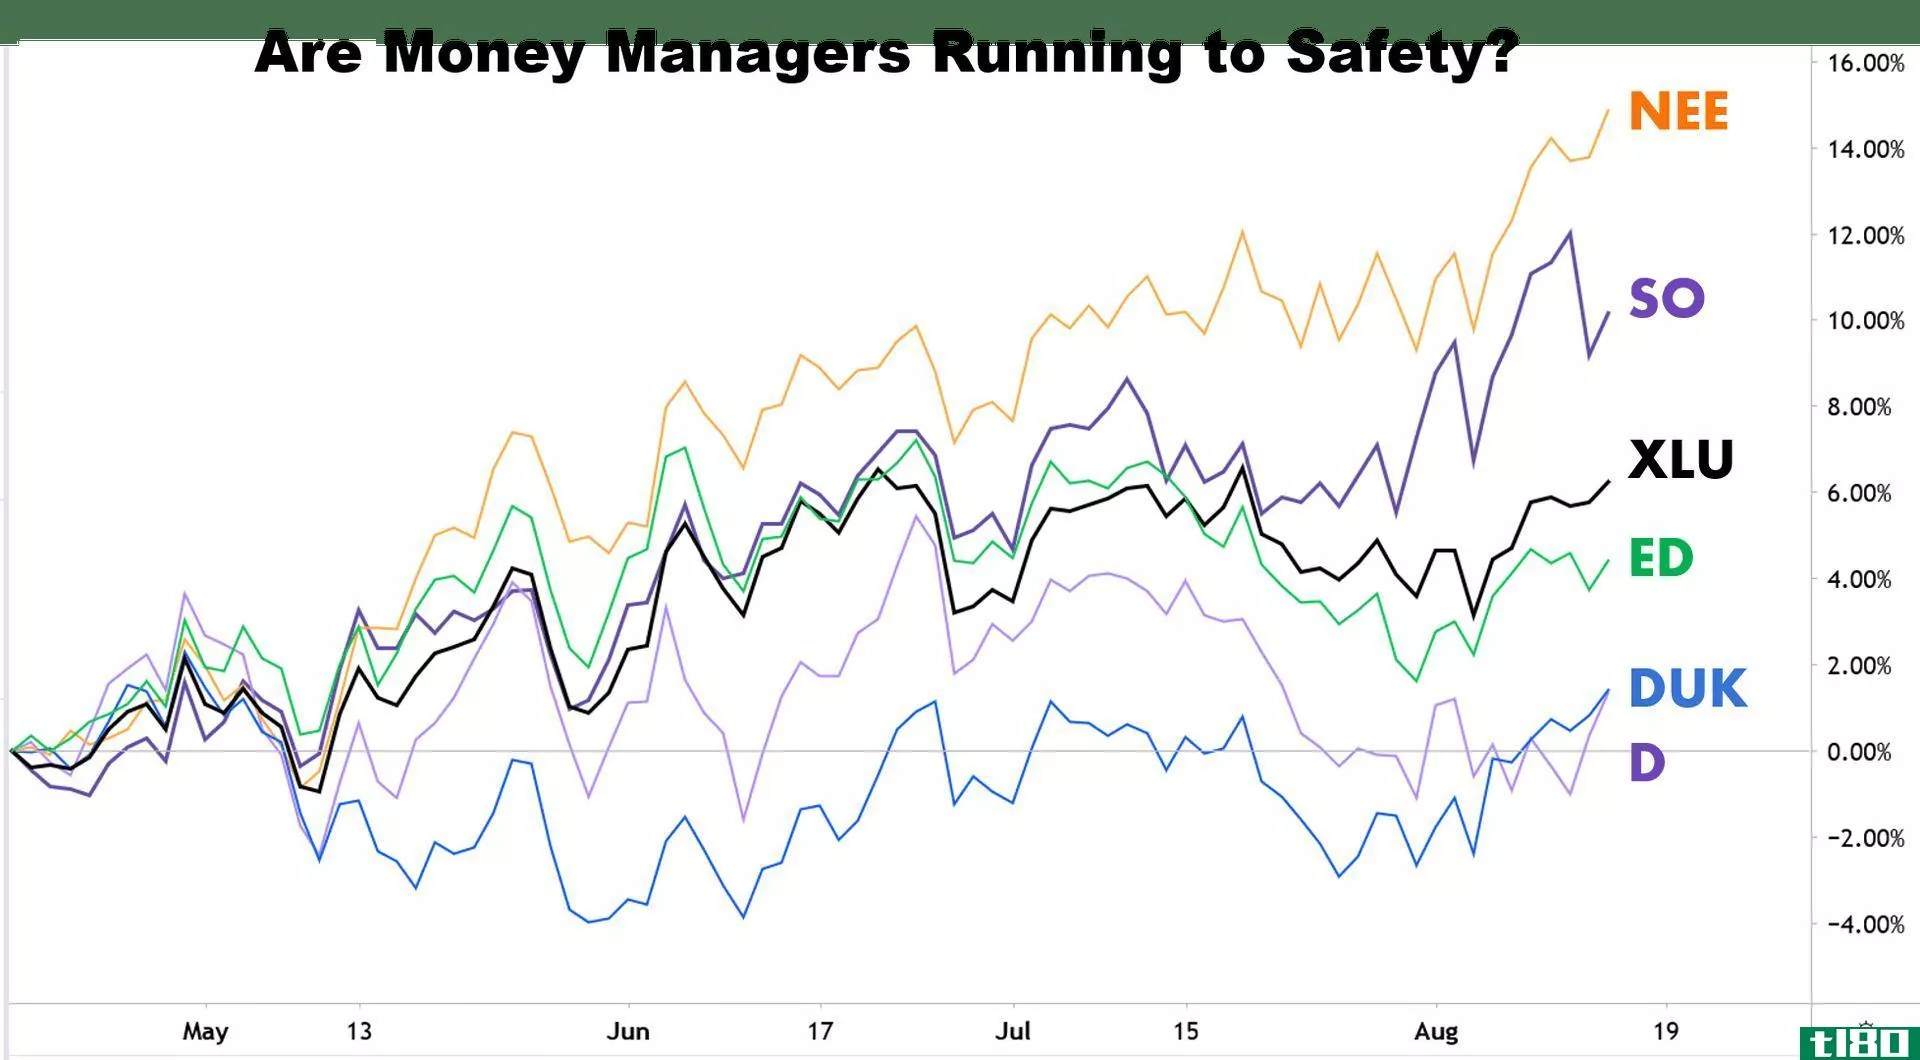 Chart showing potential run to safety by money managers